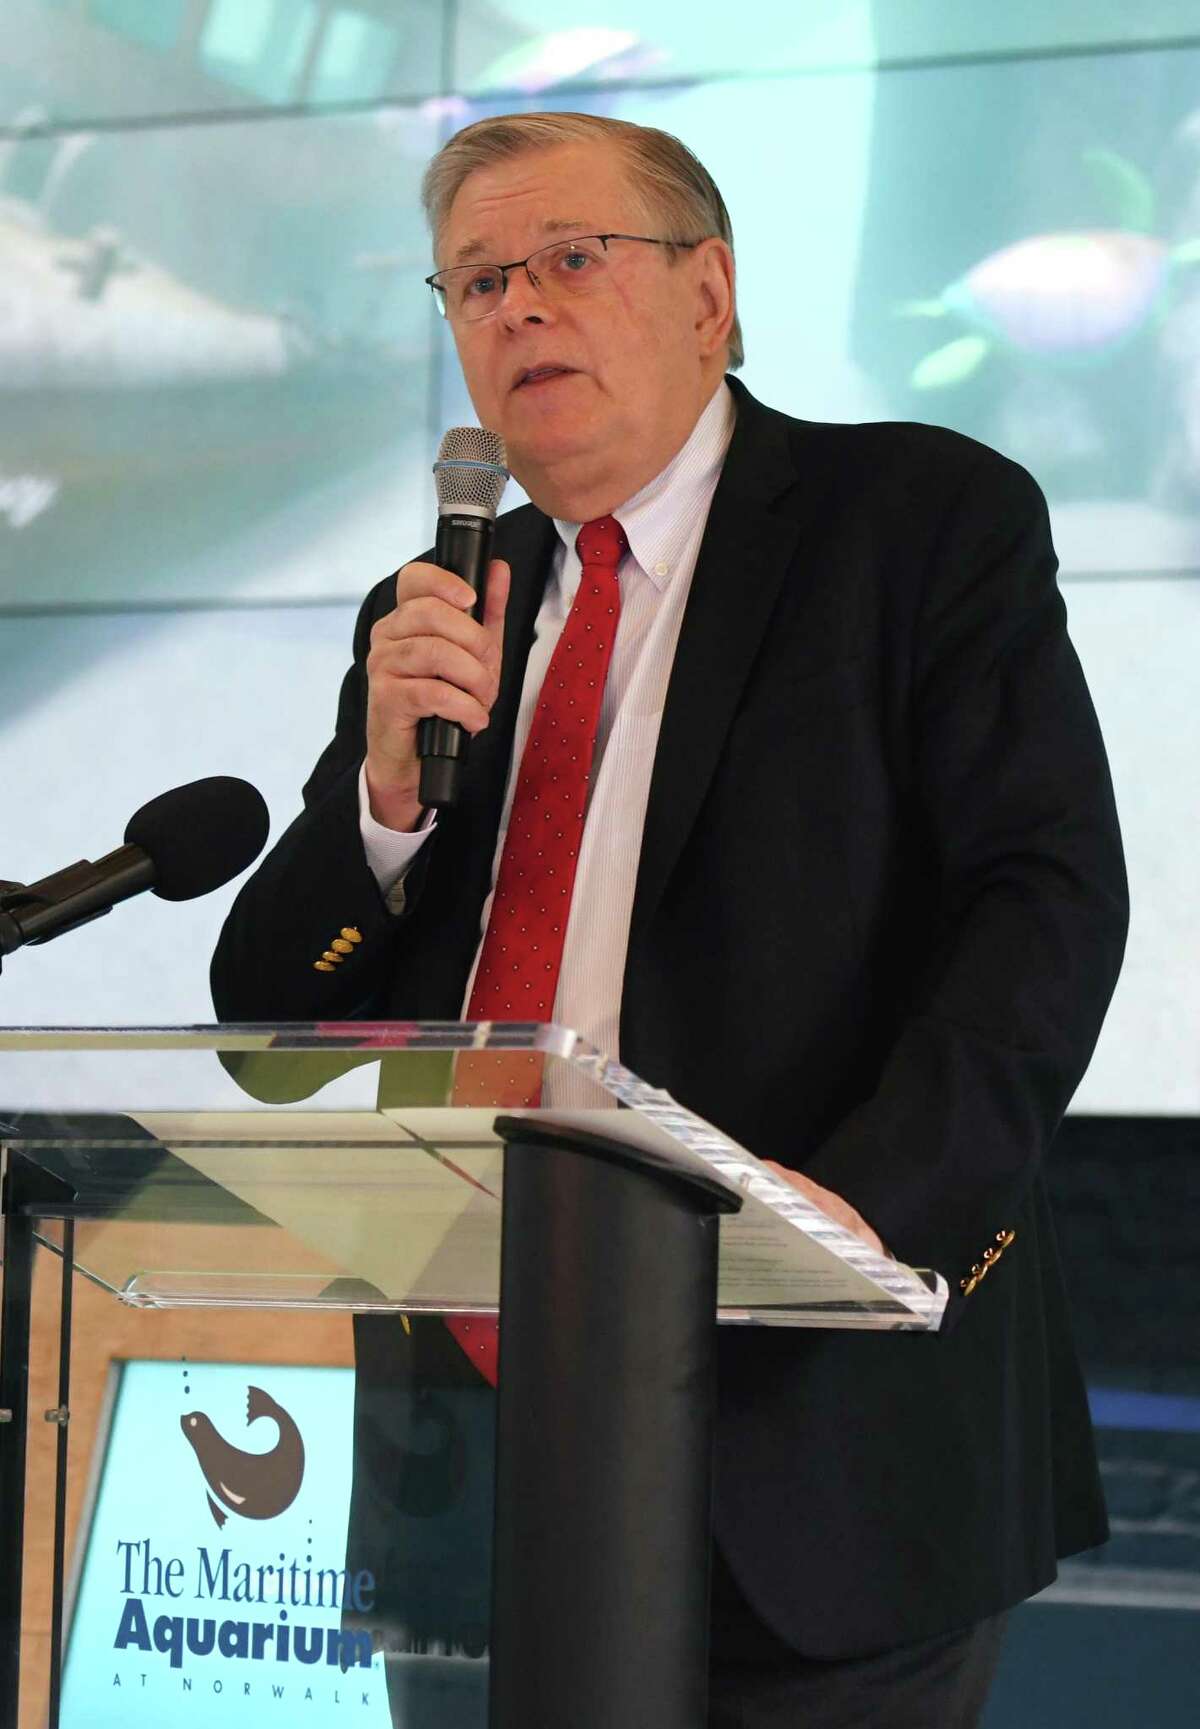 Stamford Mayor David Martin speaks during an Earth Day initiative press conference at the Martime Aquarium in Norwalk, Conn. Monday, April 22, 2019. Stamford and Norwalk leaders announced a plan to ban the use of single-use plastic straws and urged local businesses and residents to use more eco-friendly materials when possible.